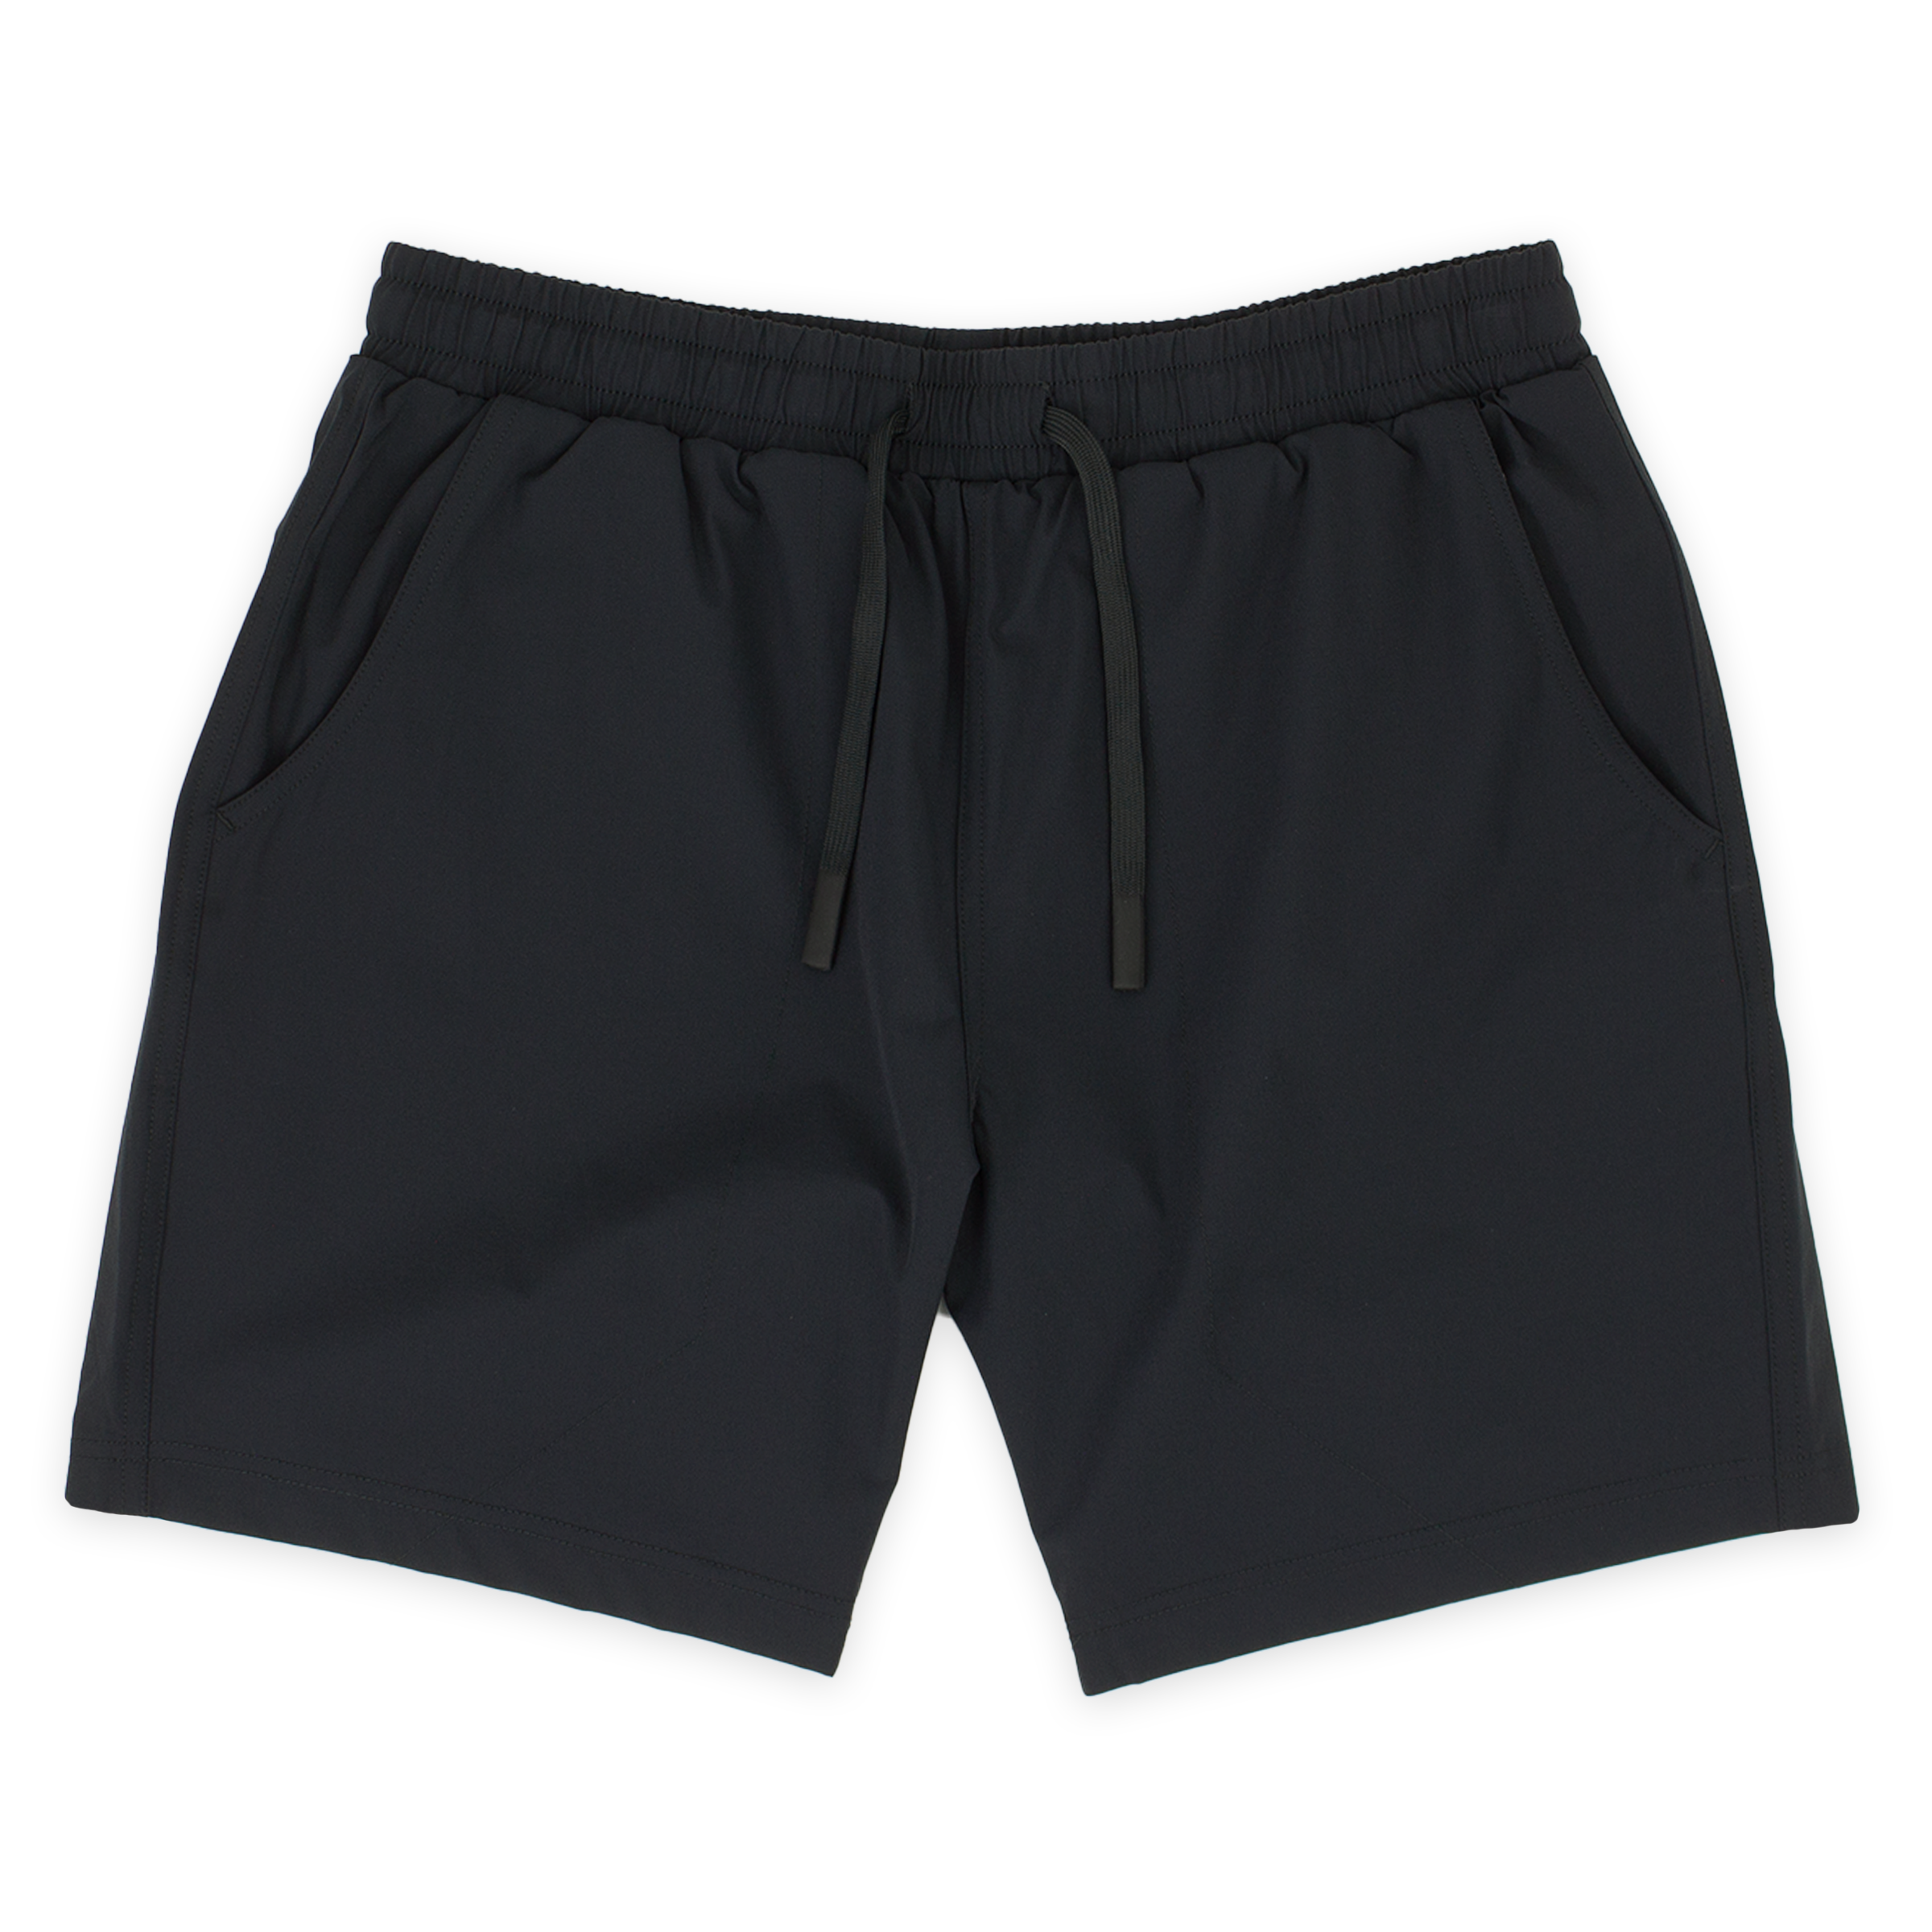 Base Short 7" Black front with elastic waistband, dyed-to-match flat drawstring with rubberized tips, and two seam pockets